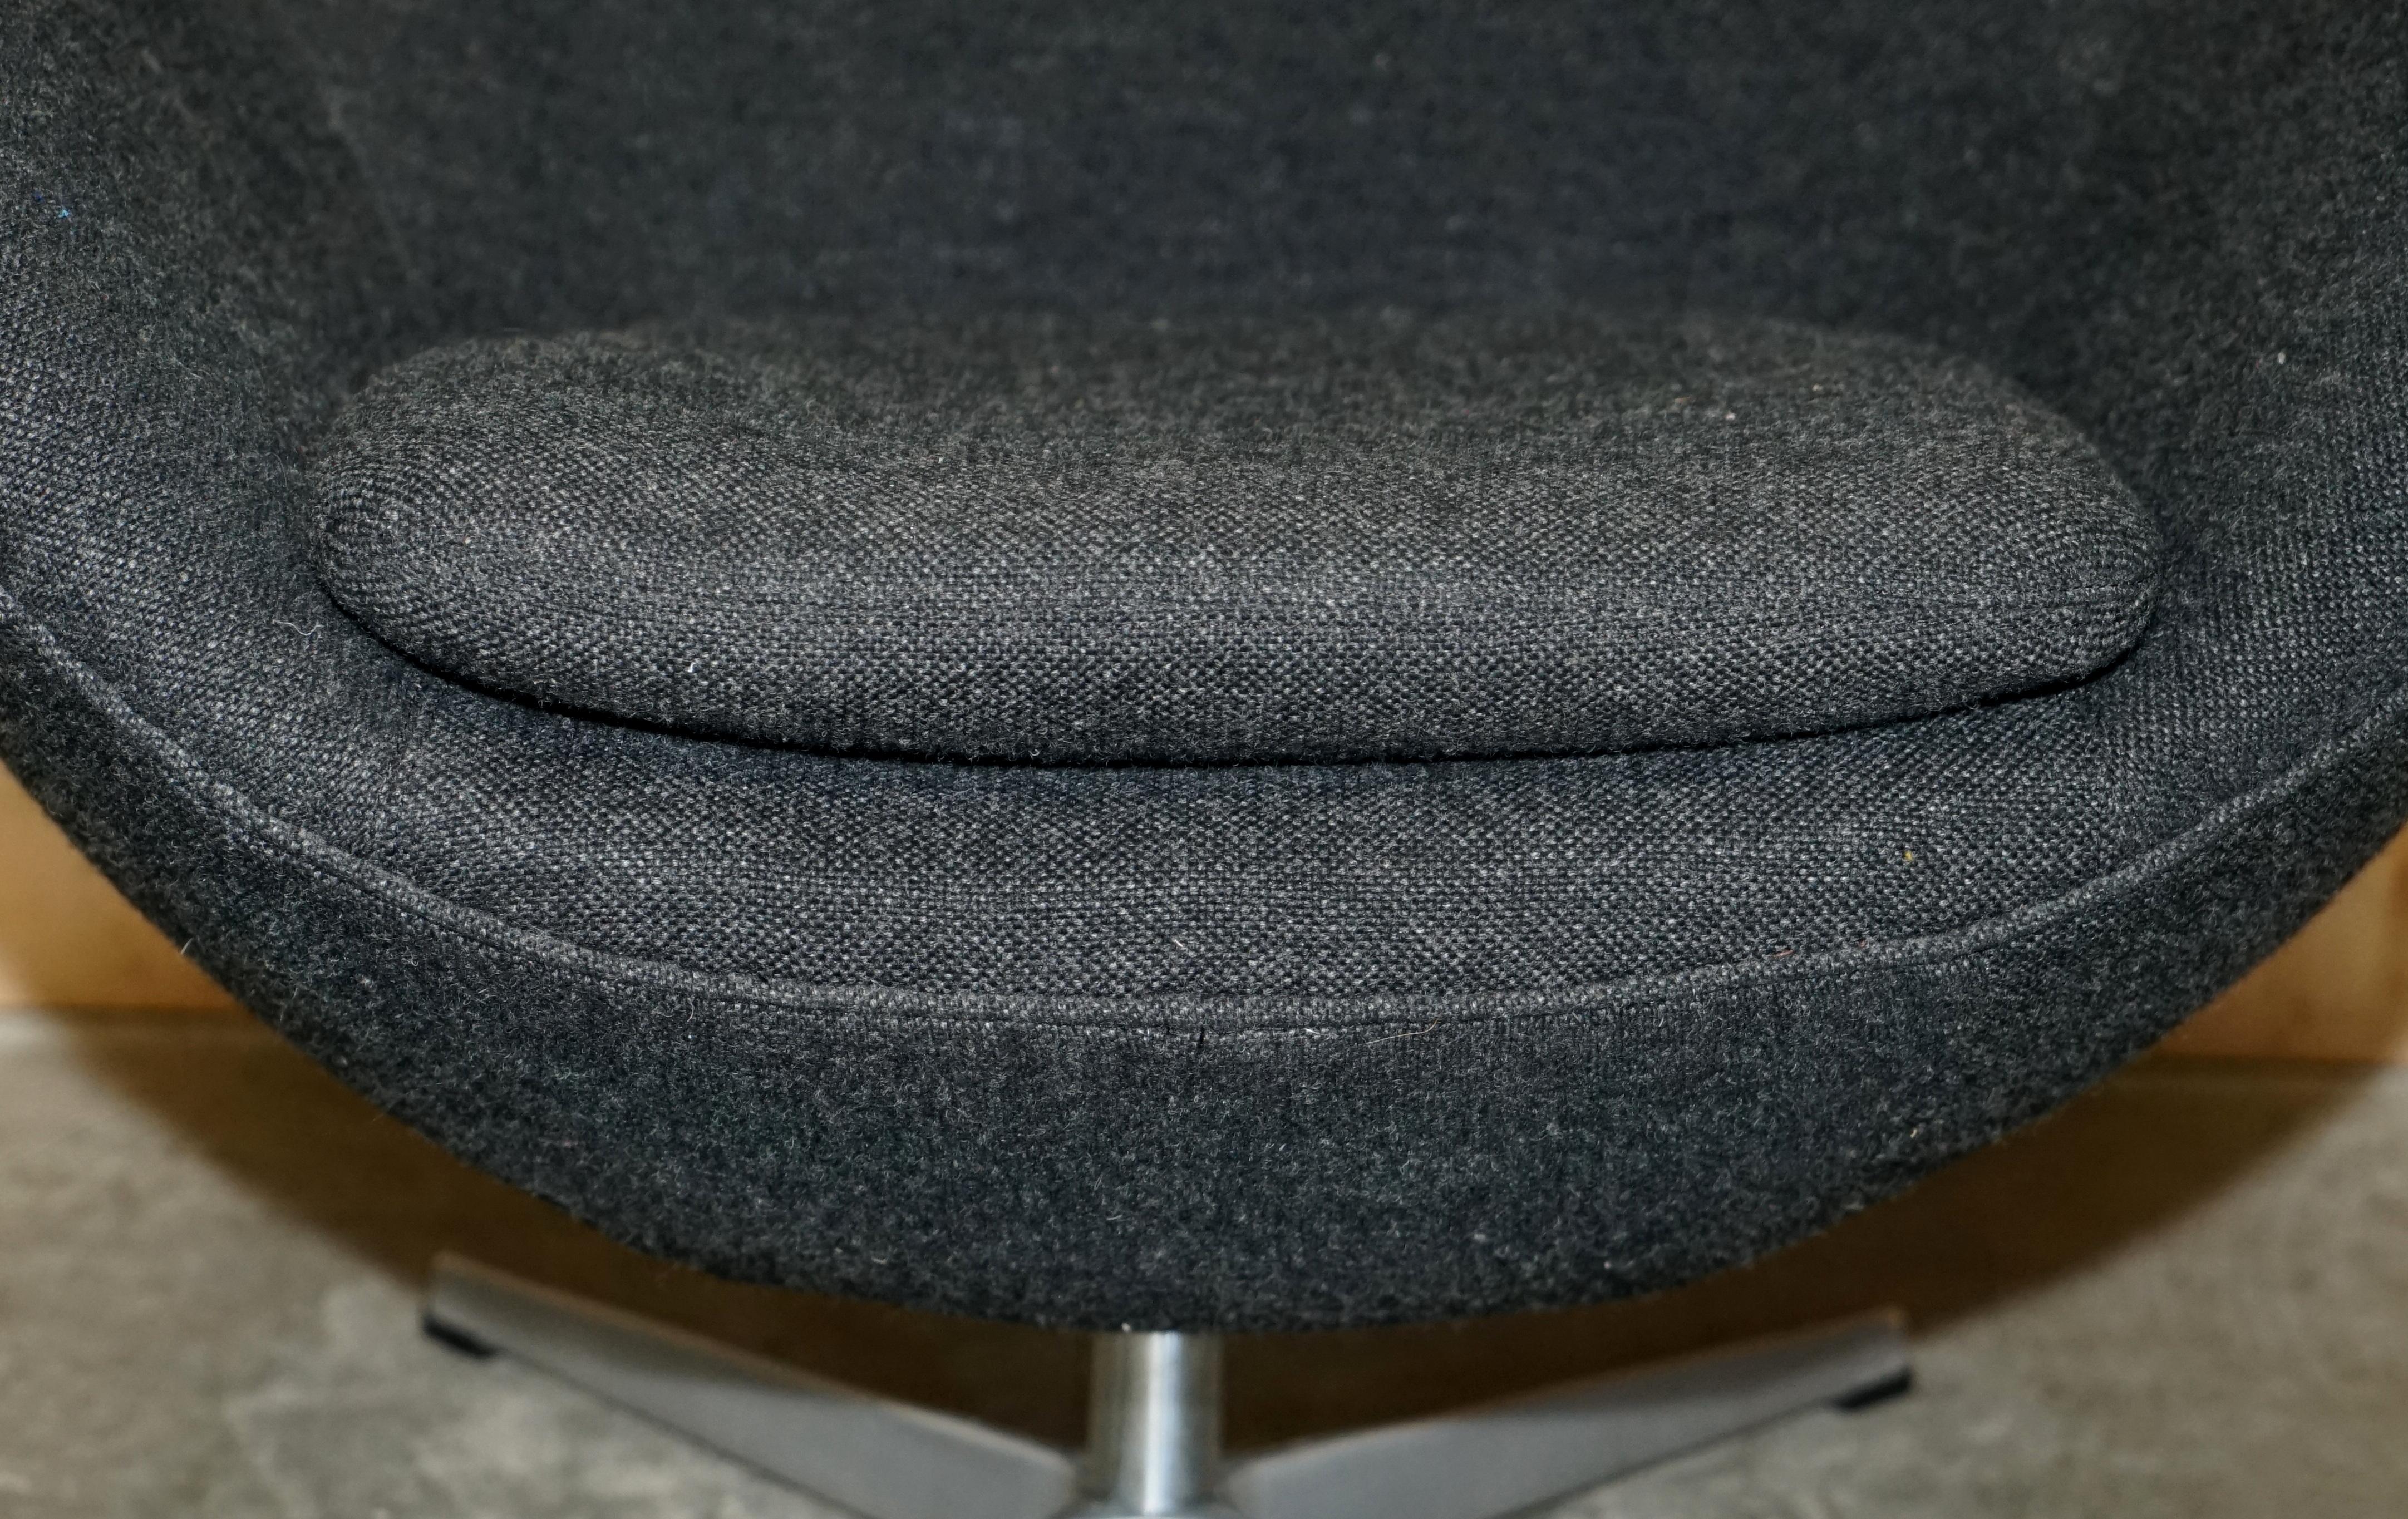 Original 1996 Stamped Fritz Hansen Egg Chair in Black / Grey Fabric For Sale 2